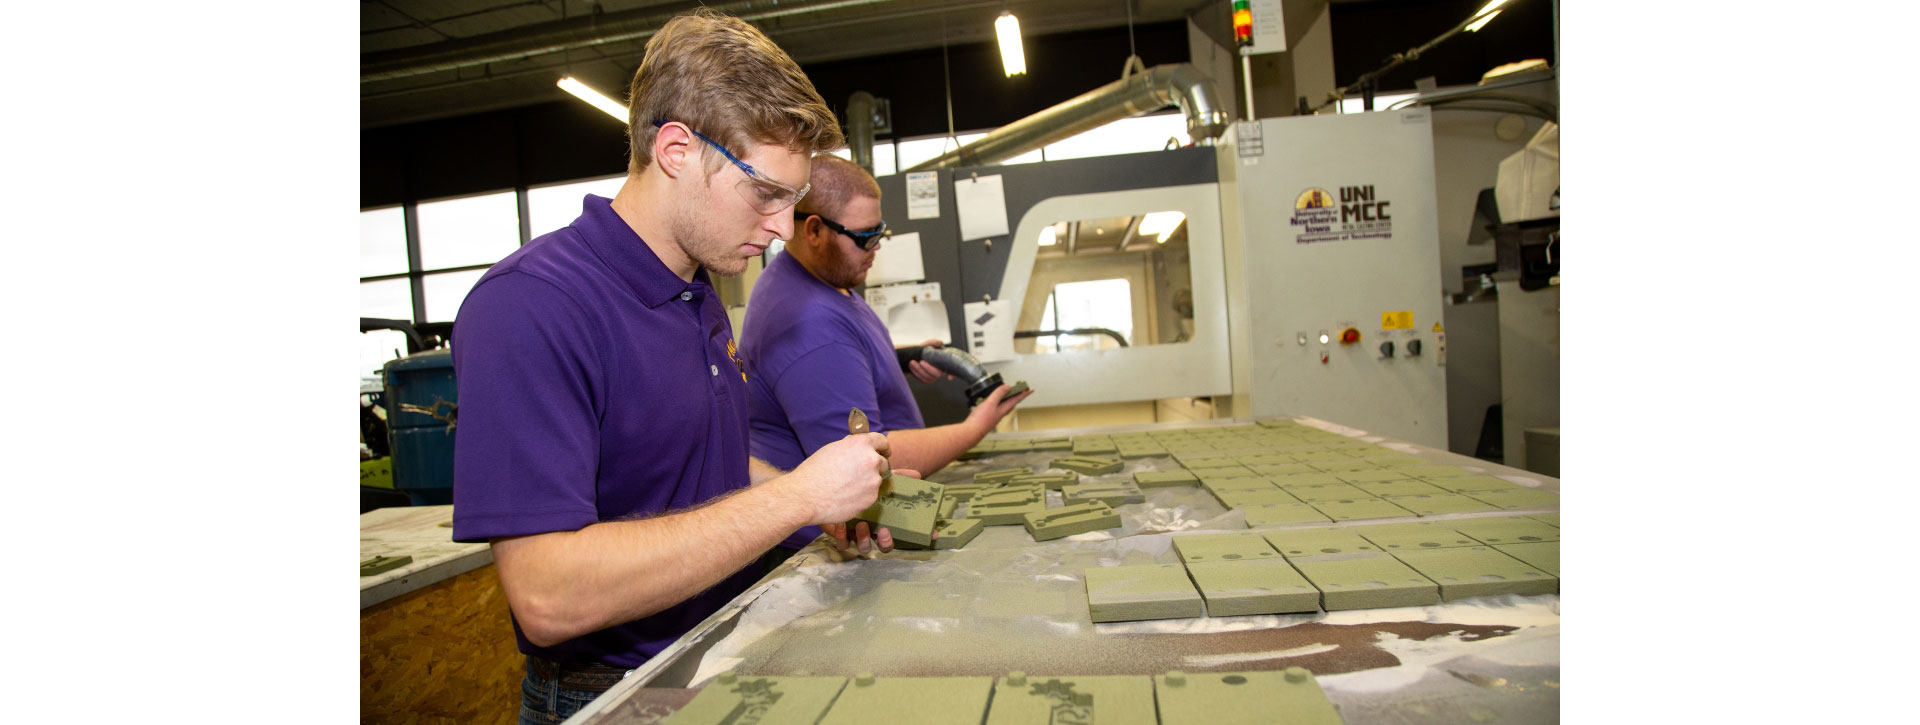 students in engineering lab at university of northern iowa